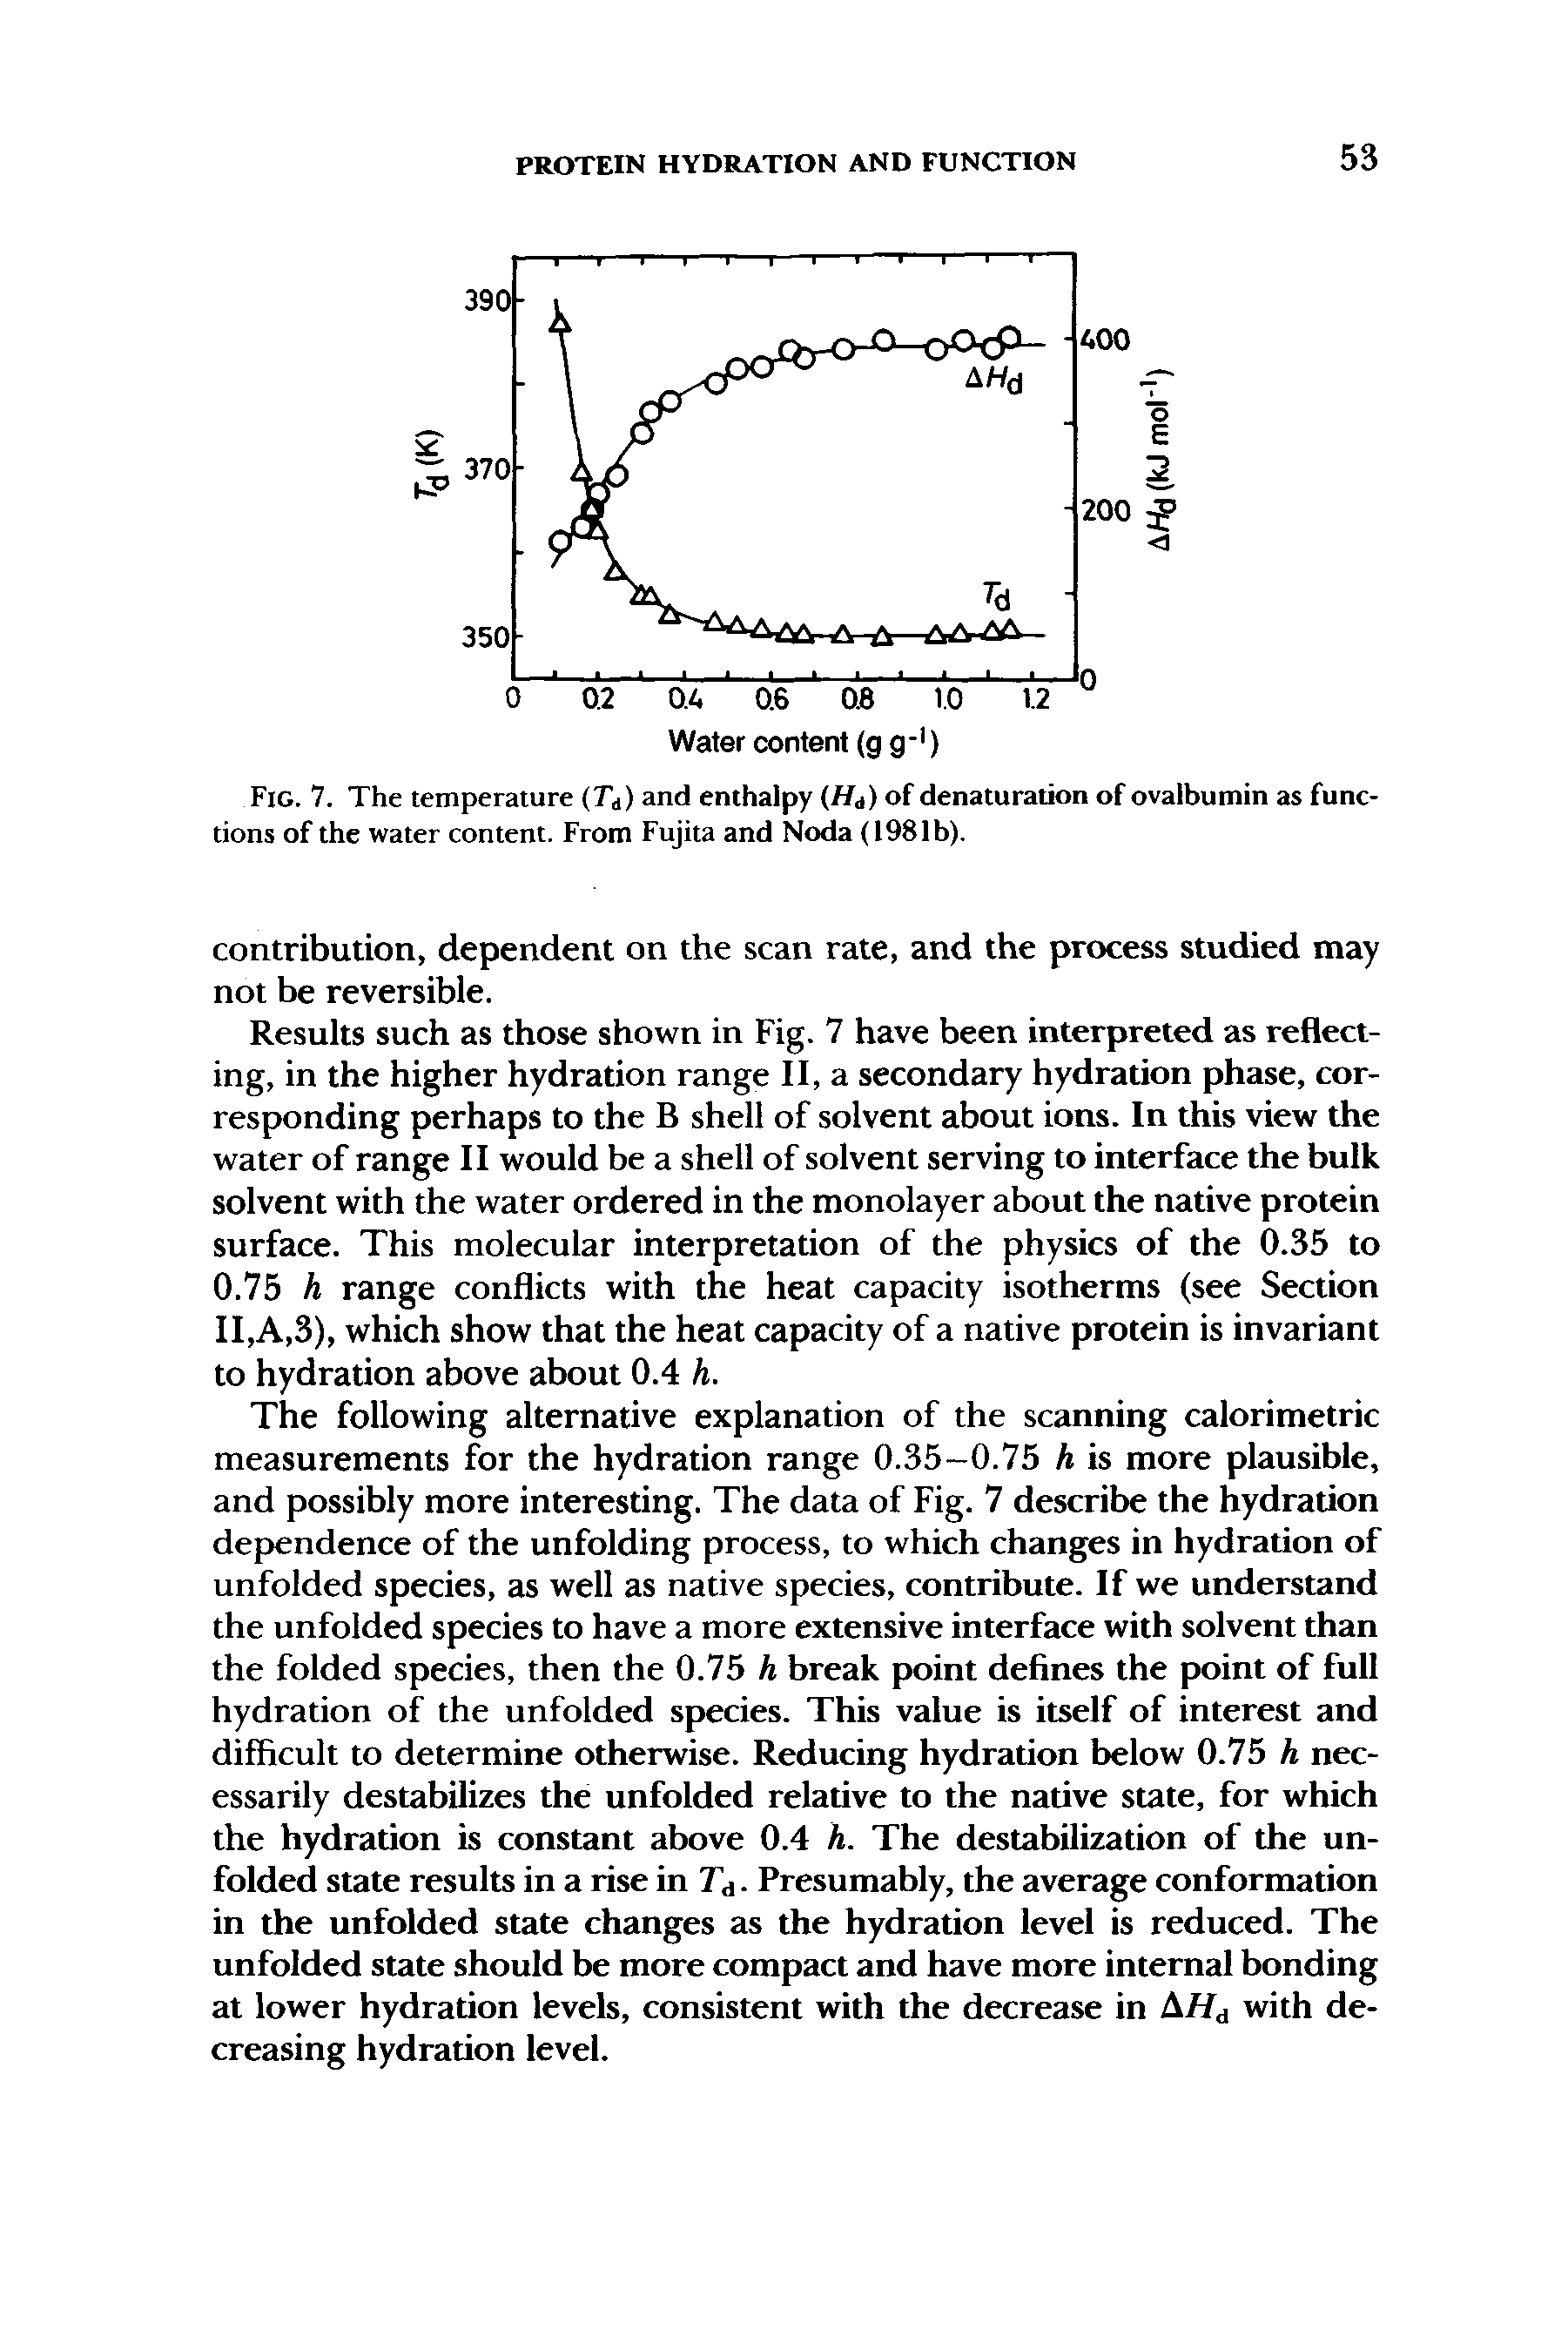 Fig. 7. The temperature (Tj) and enthalpy (Hi) of denaturation of ovalbumin as functions of the water content. From Fujita and Noda (1981b).